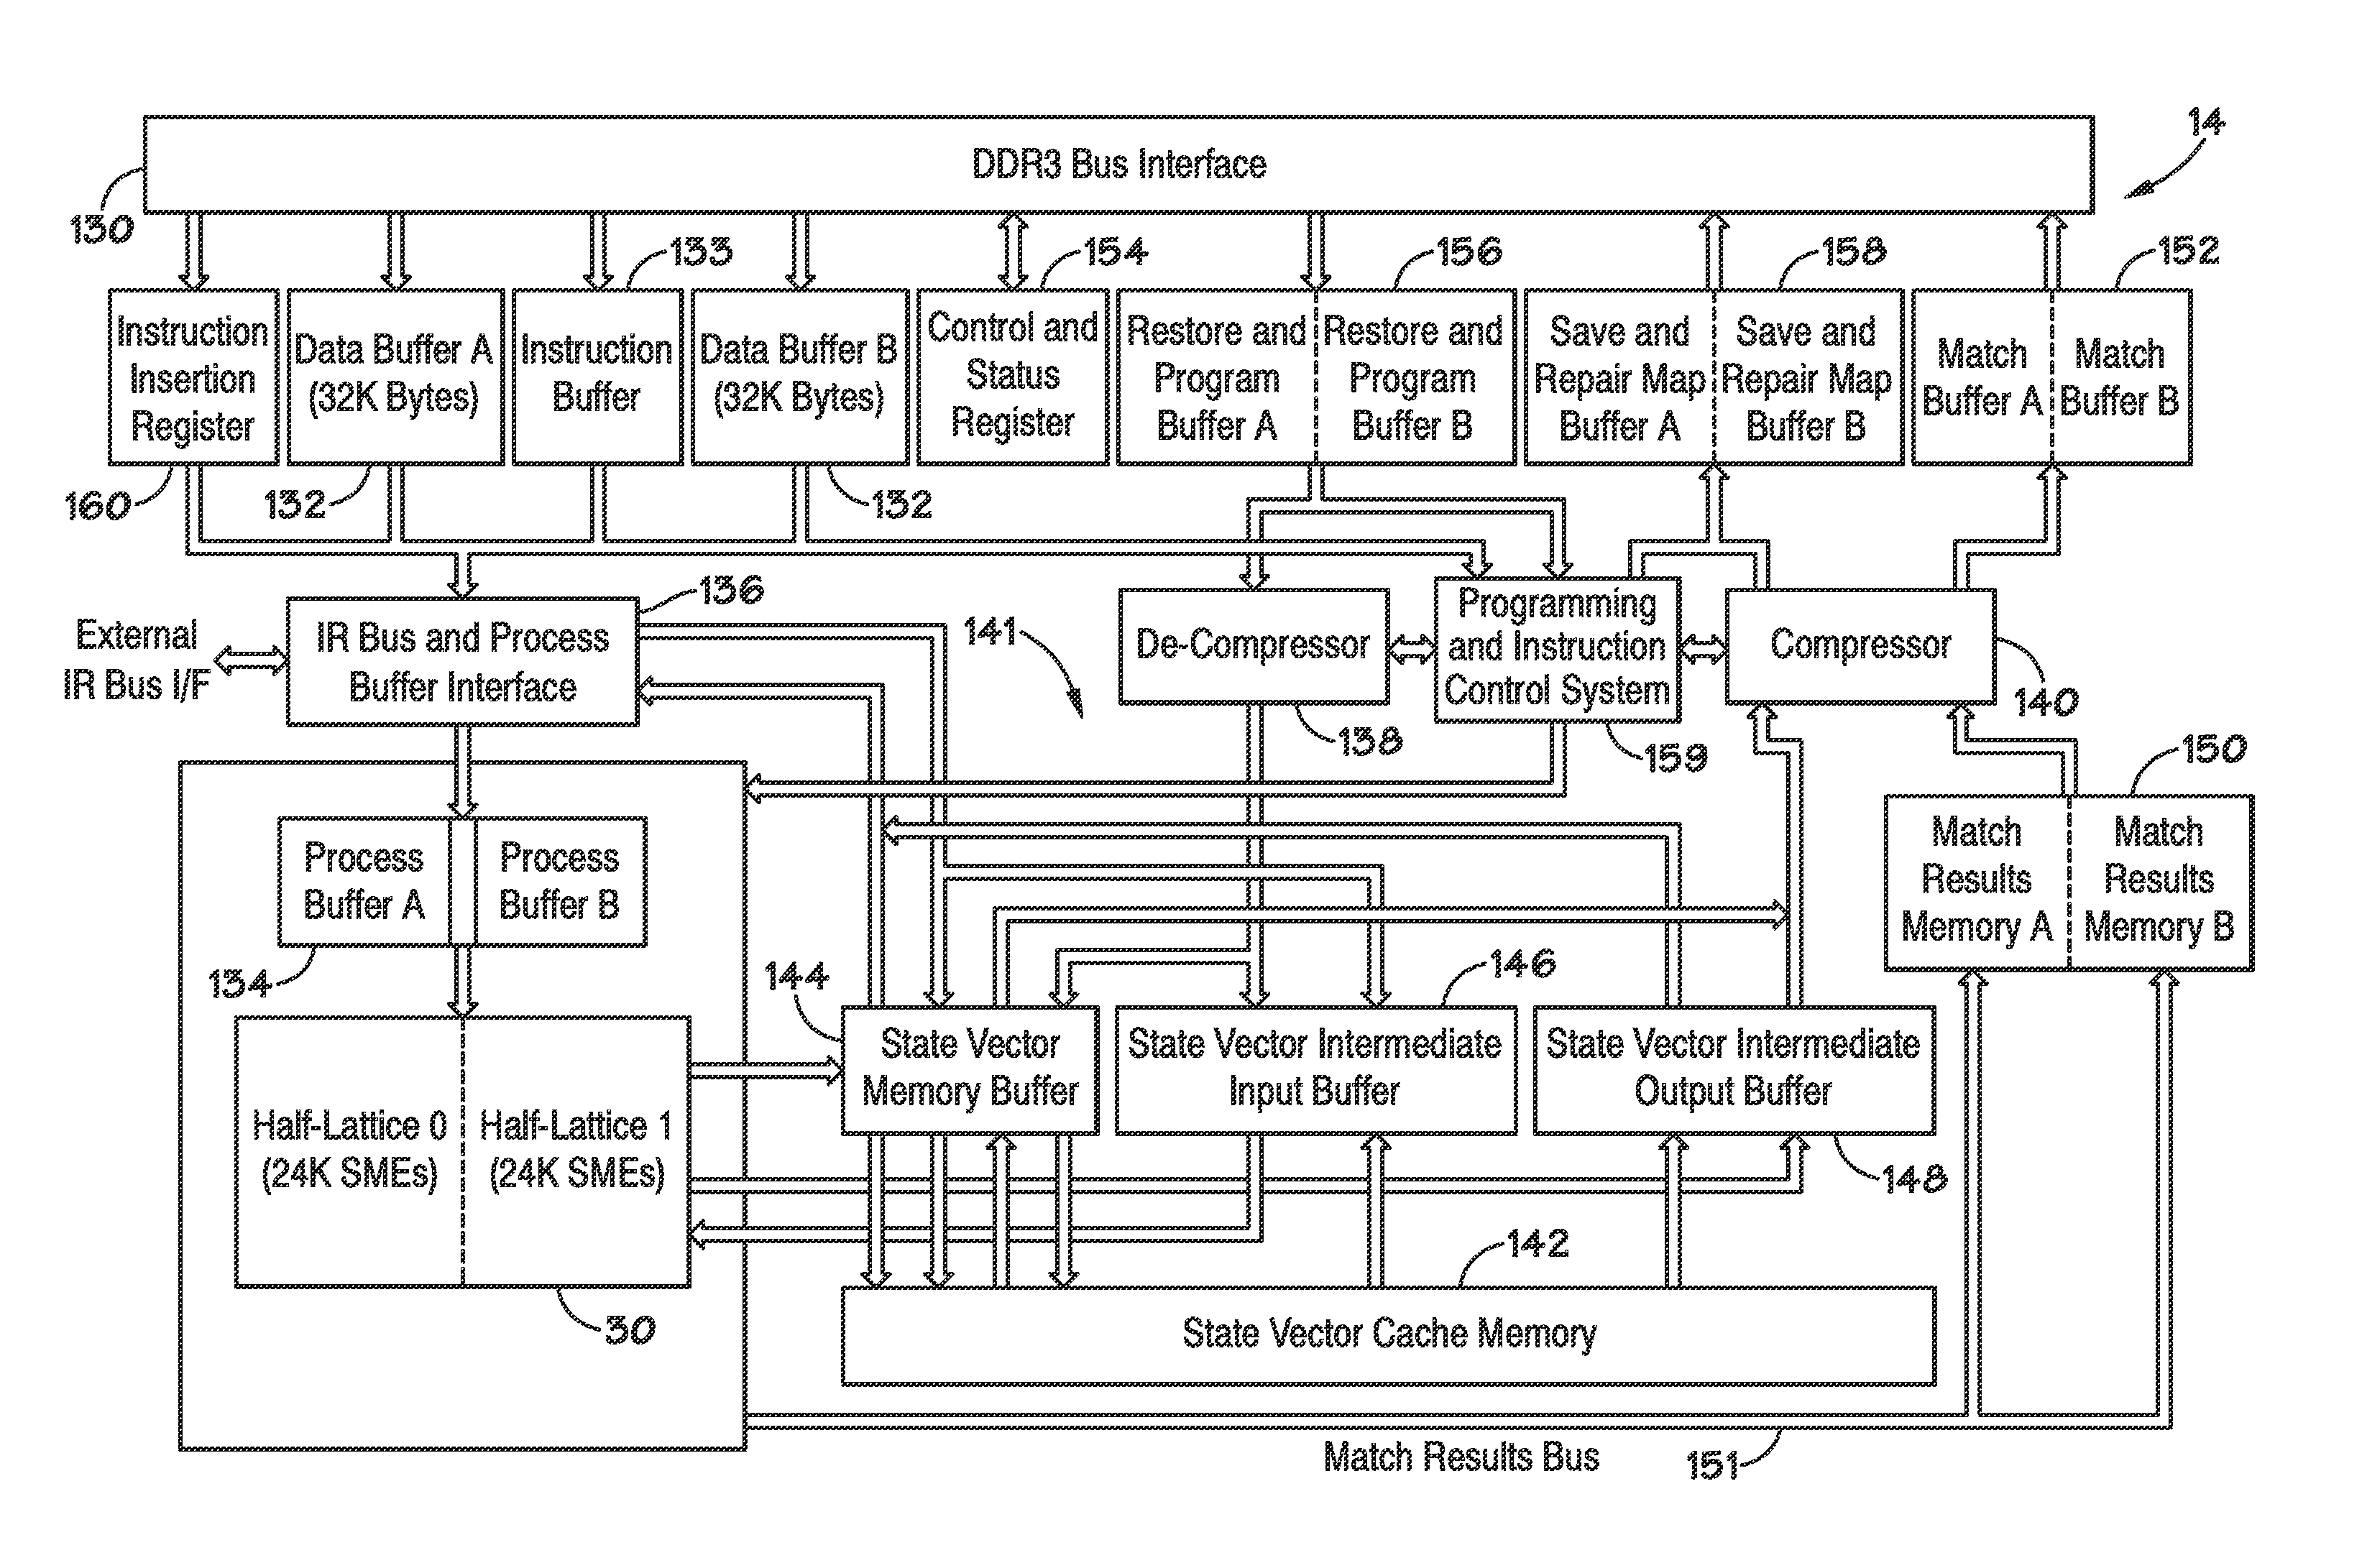 Instruction insertion in state machine engines